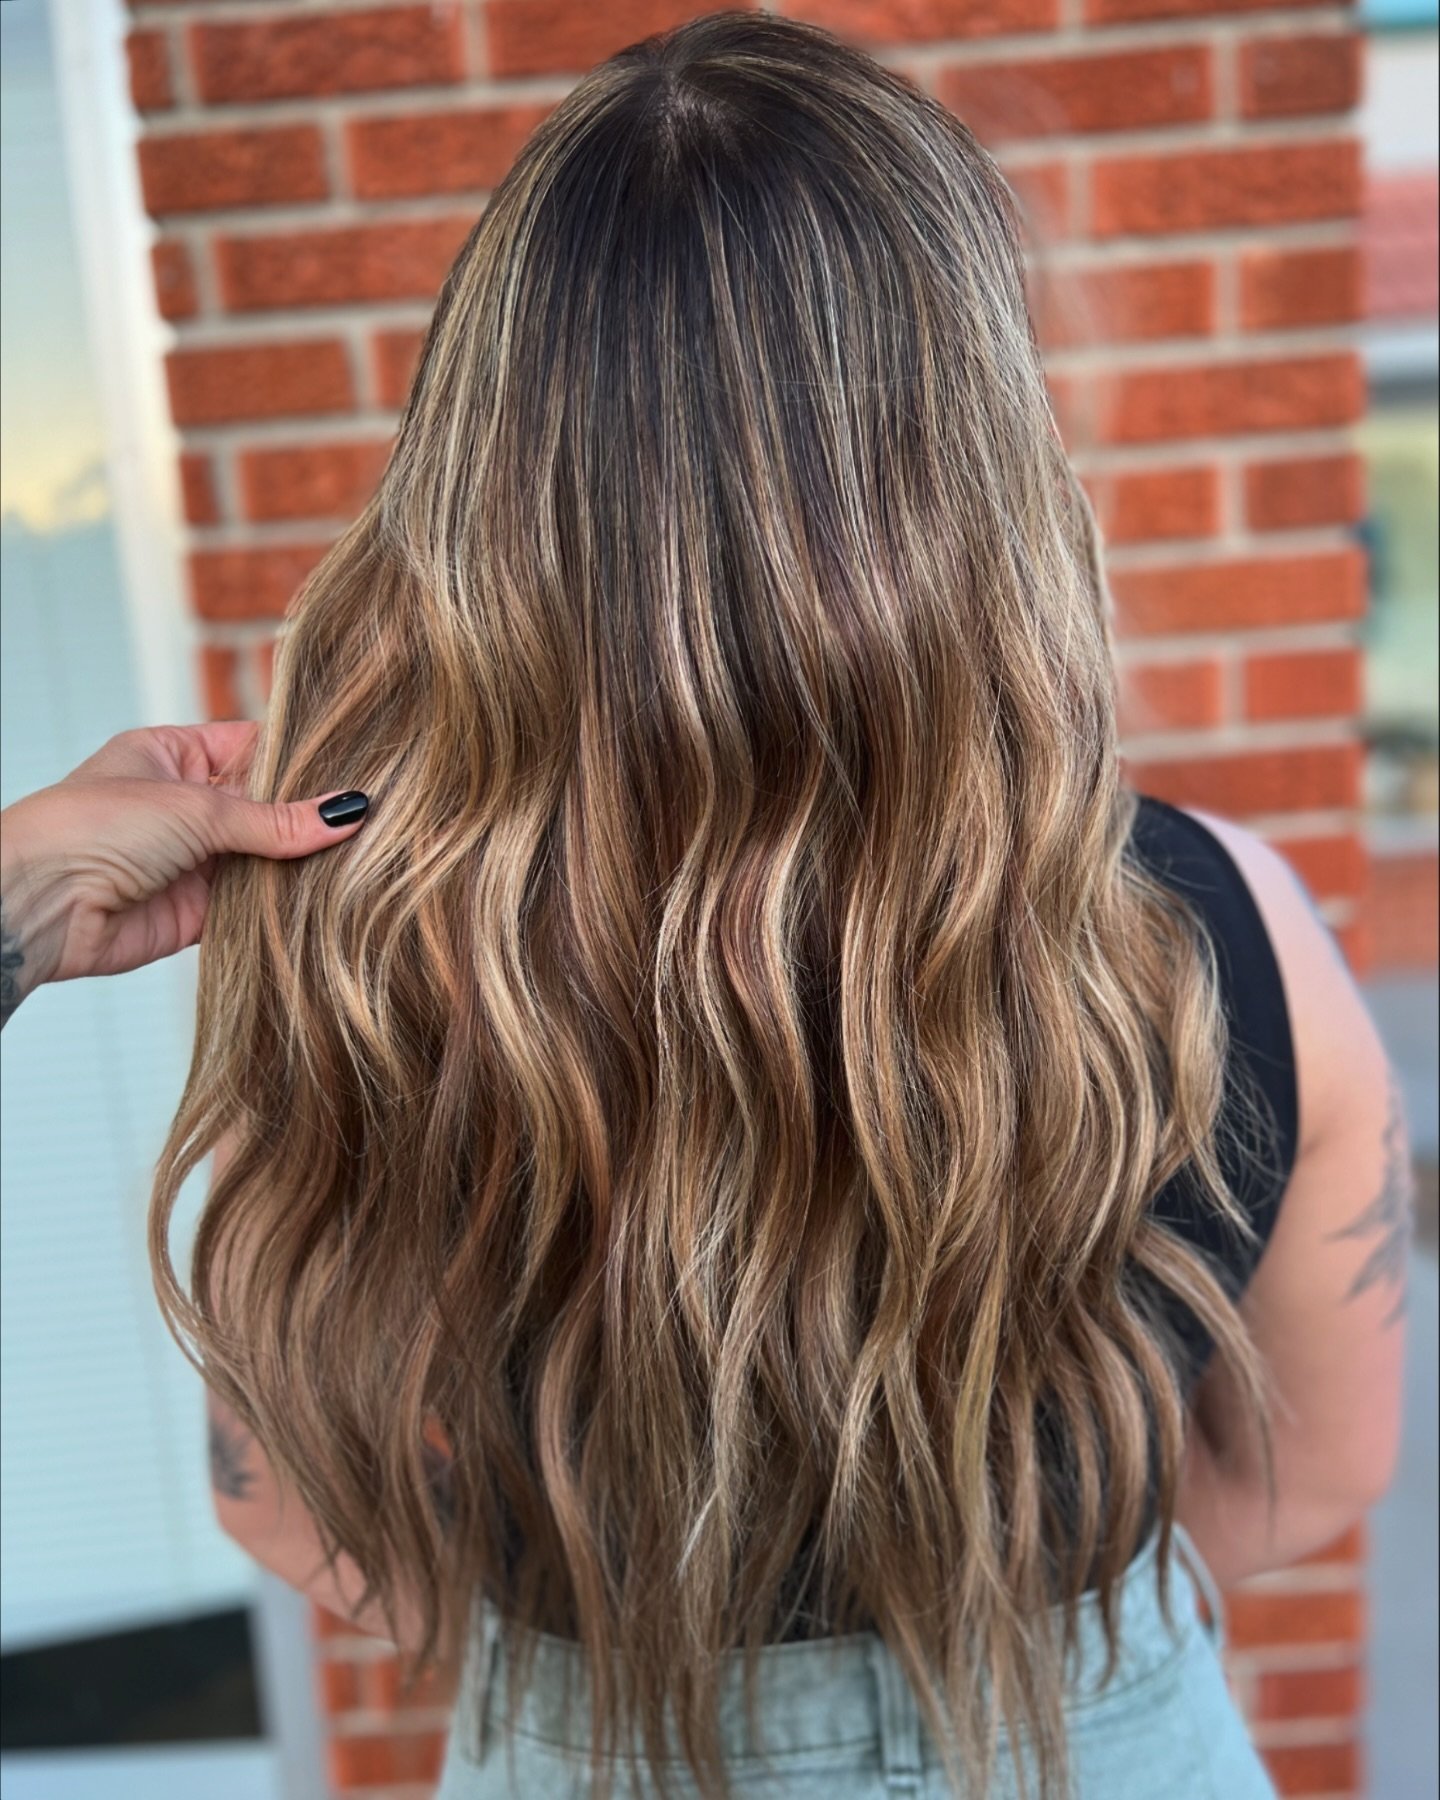 Golden hour.🌅☀️ This hair and this lady always deserve a permanent spot on the feed! @ivynailz 💛💛